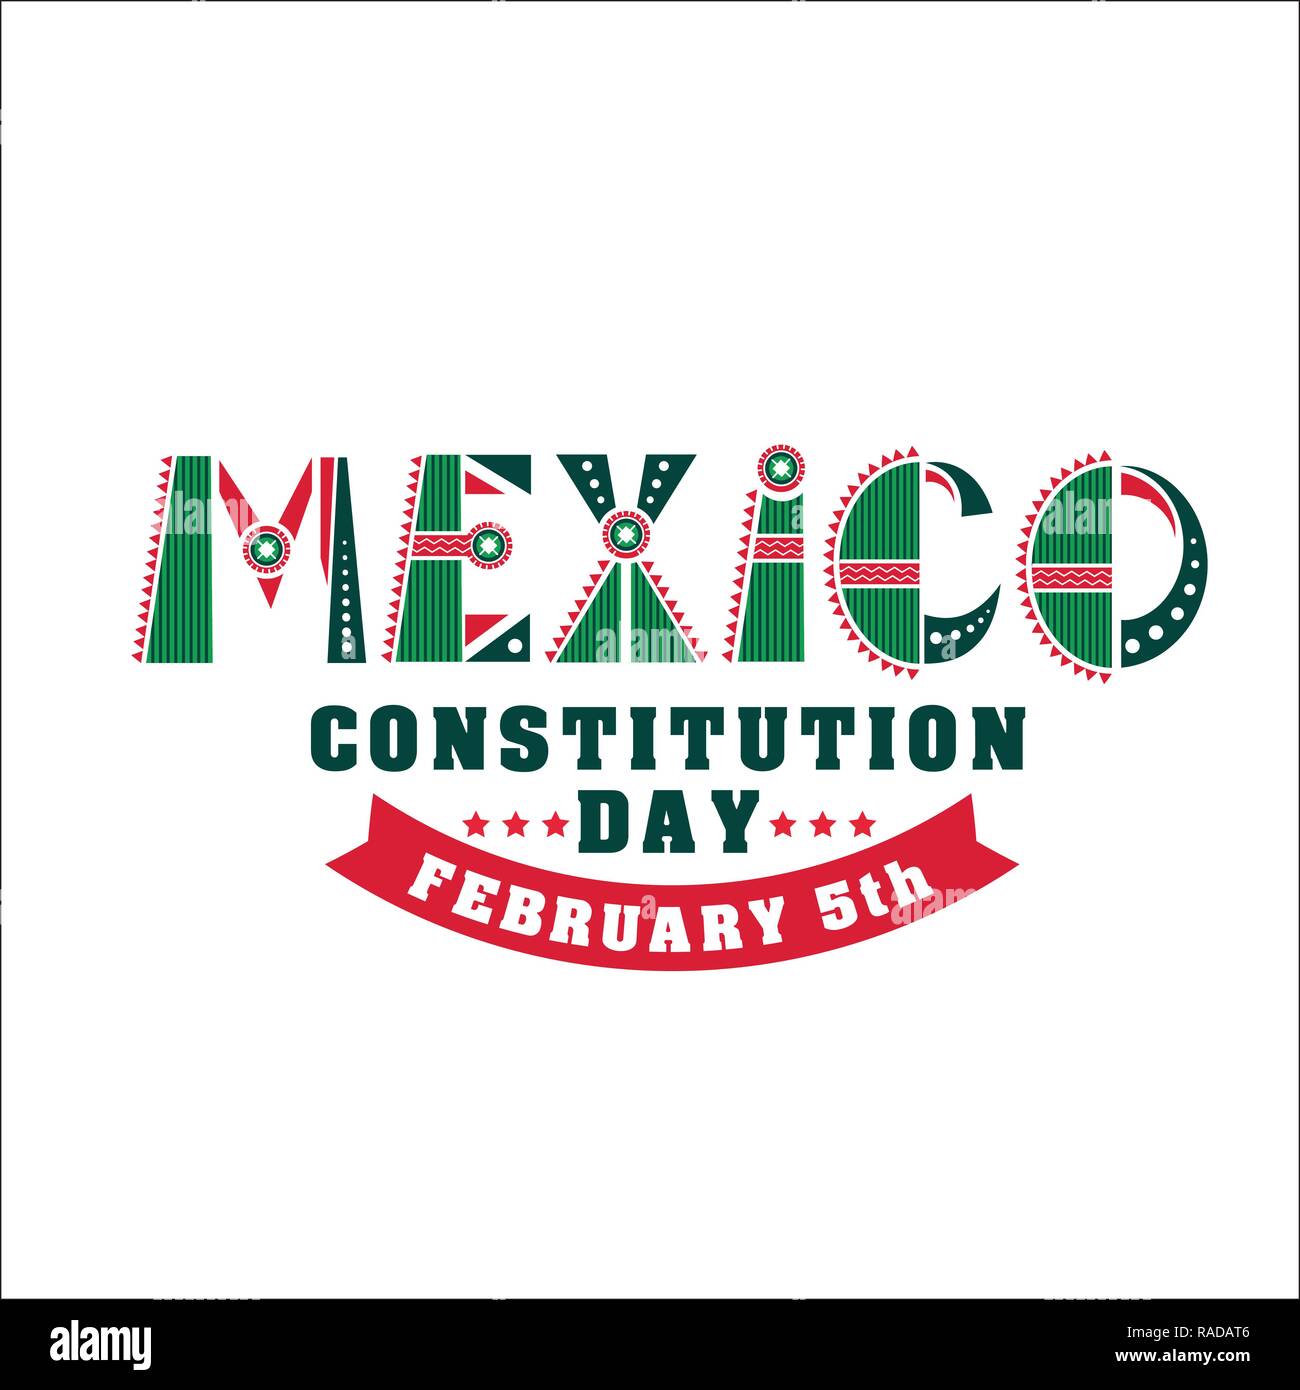 Mexico Constitution day illustration. Vector 5 february Celebration Card. Stock Vector